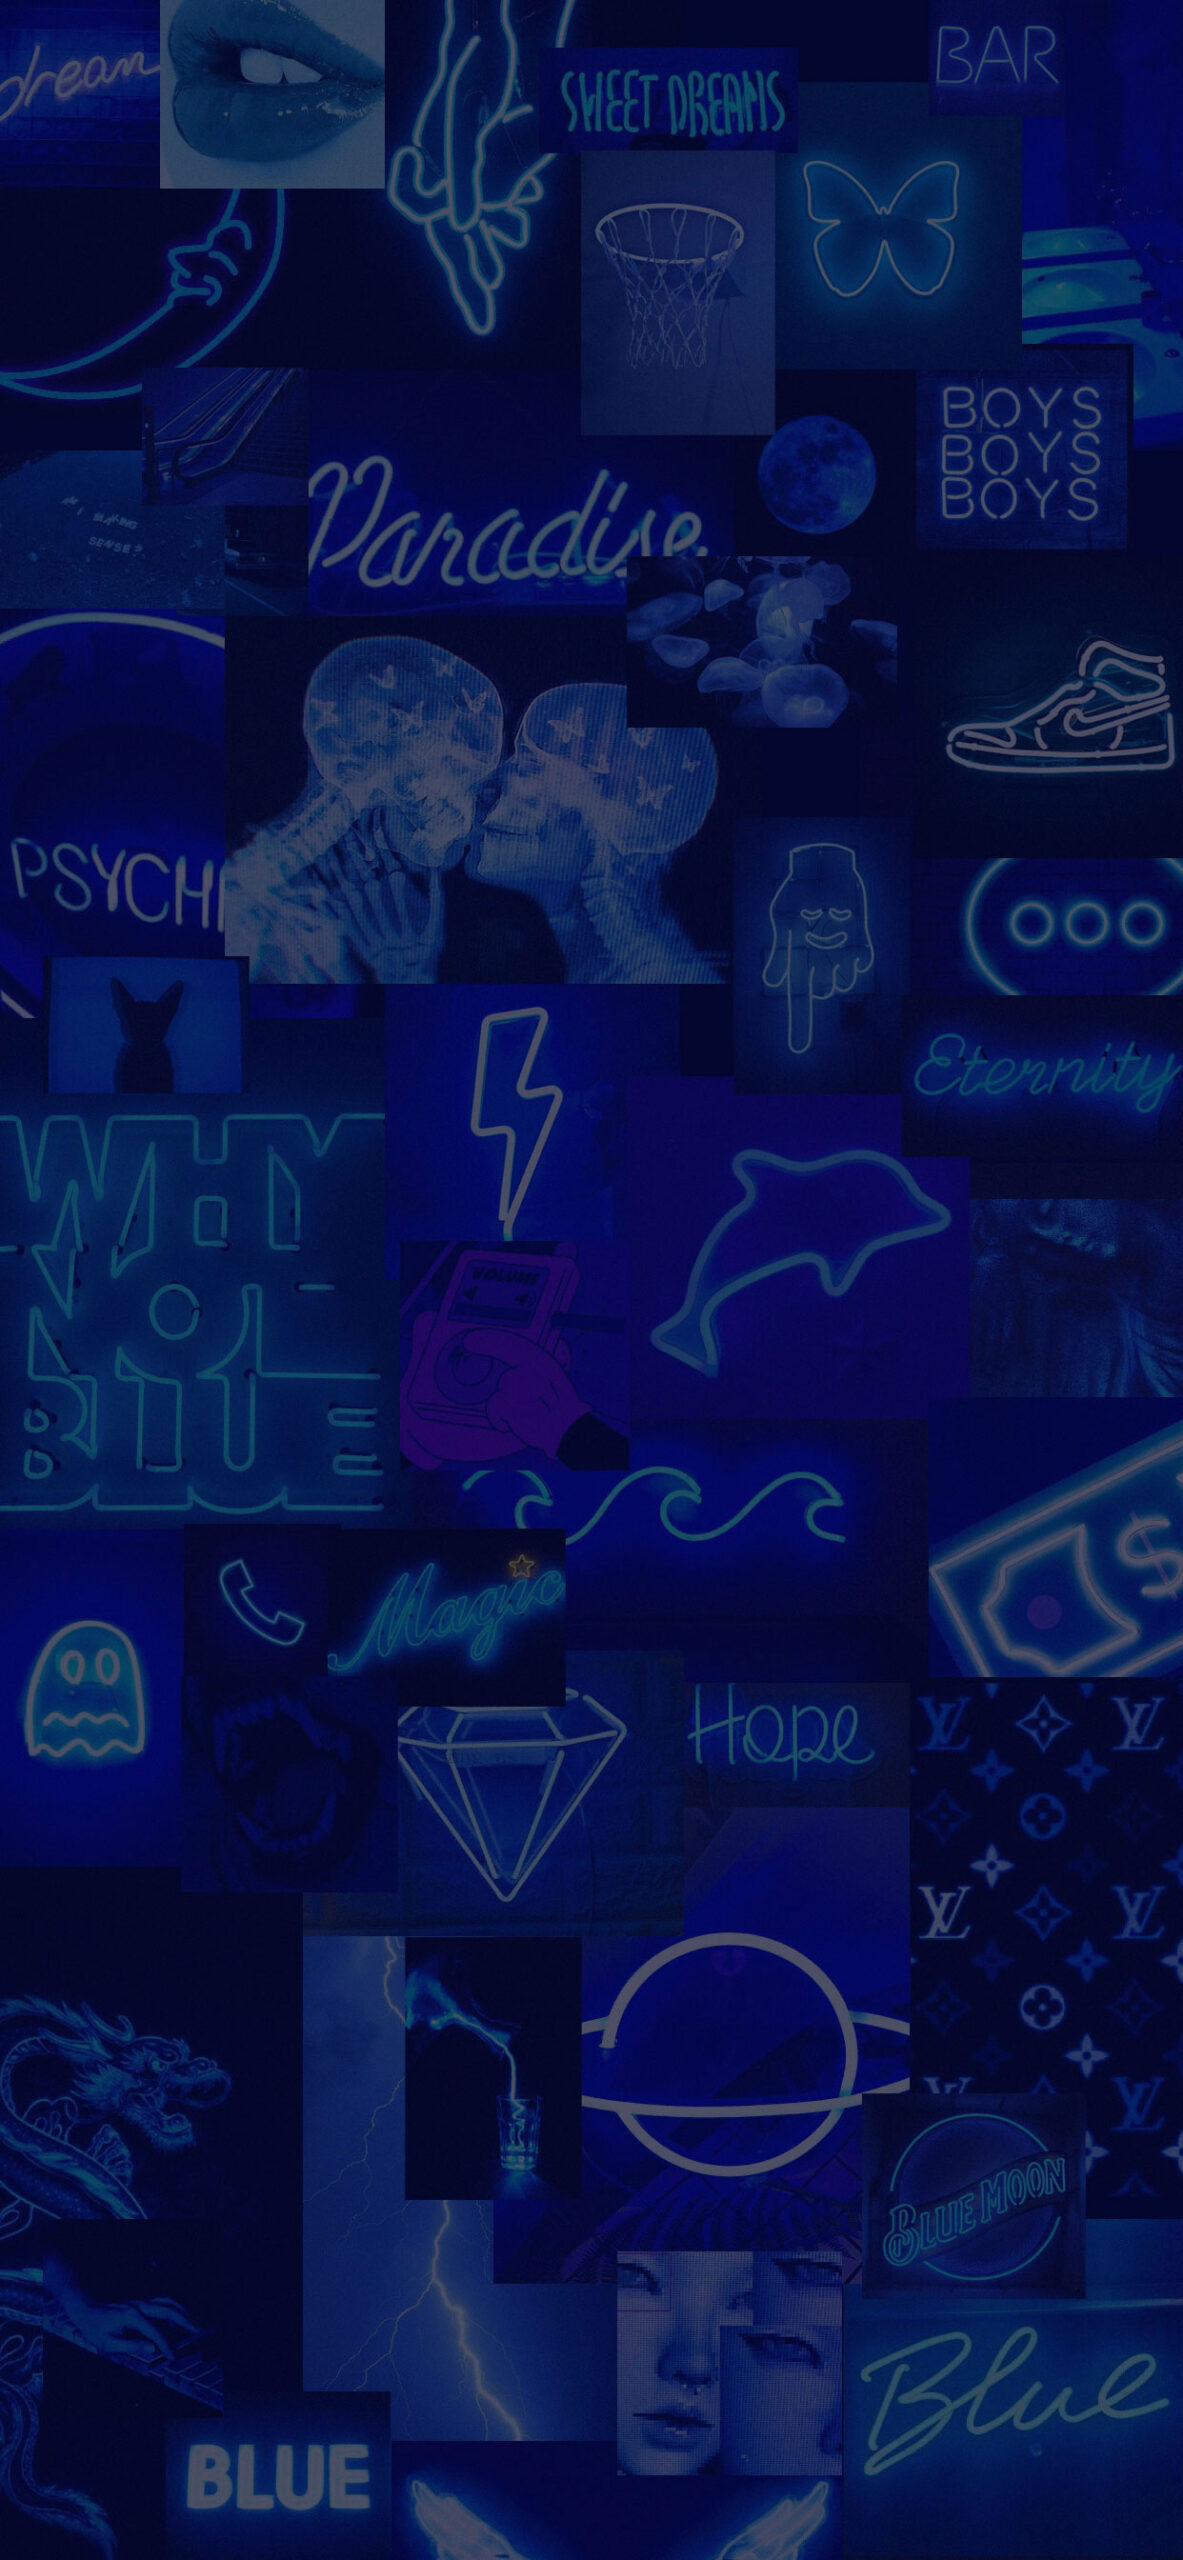 Blue Neon Aesthetic Wallpapers - Aesthetic Blue Wallpaper for iPhone